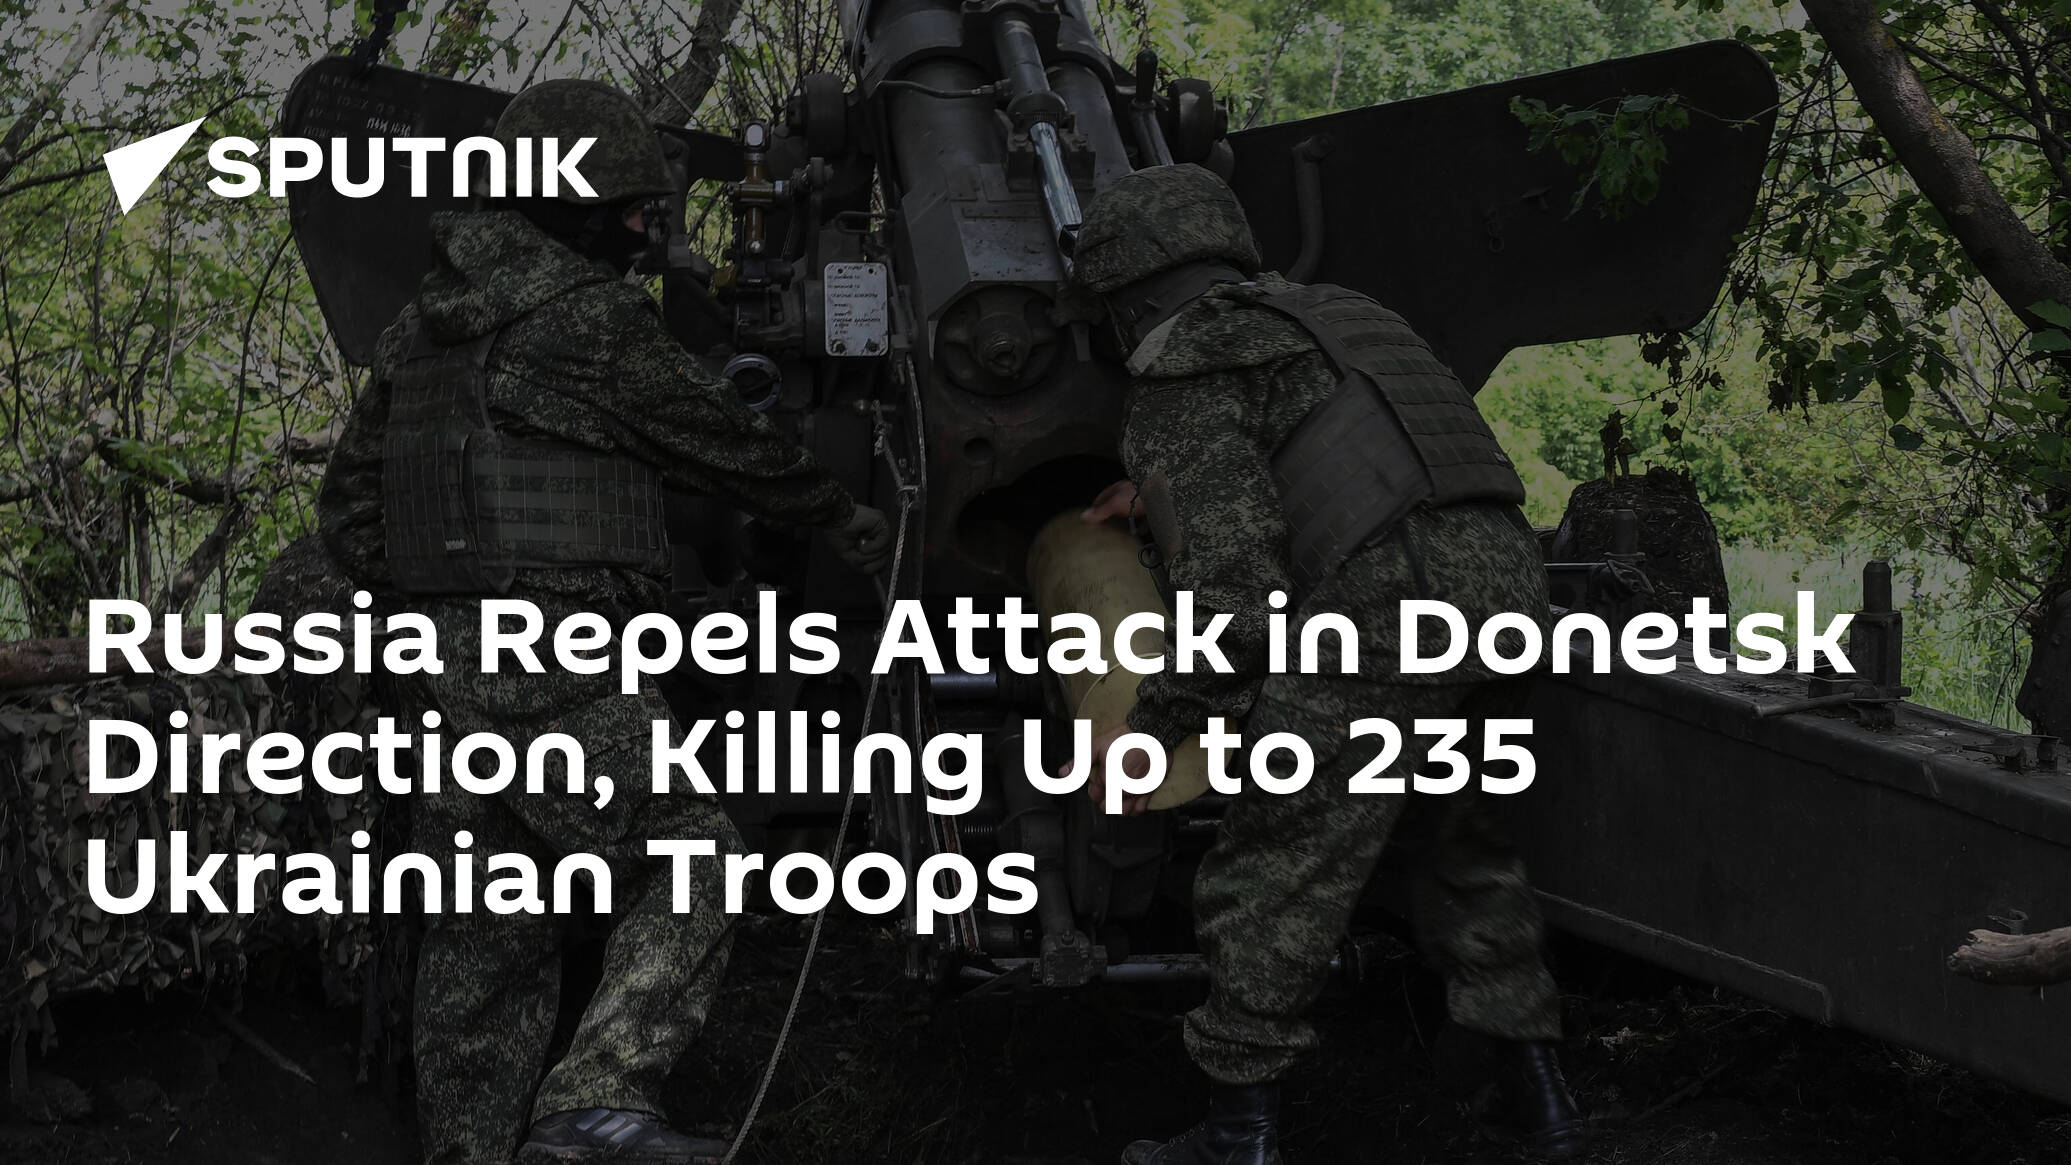 Russia Repels Attack in Donetsk Direction, Killing Up to 235 Ukrainian Troops